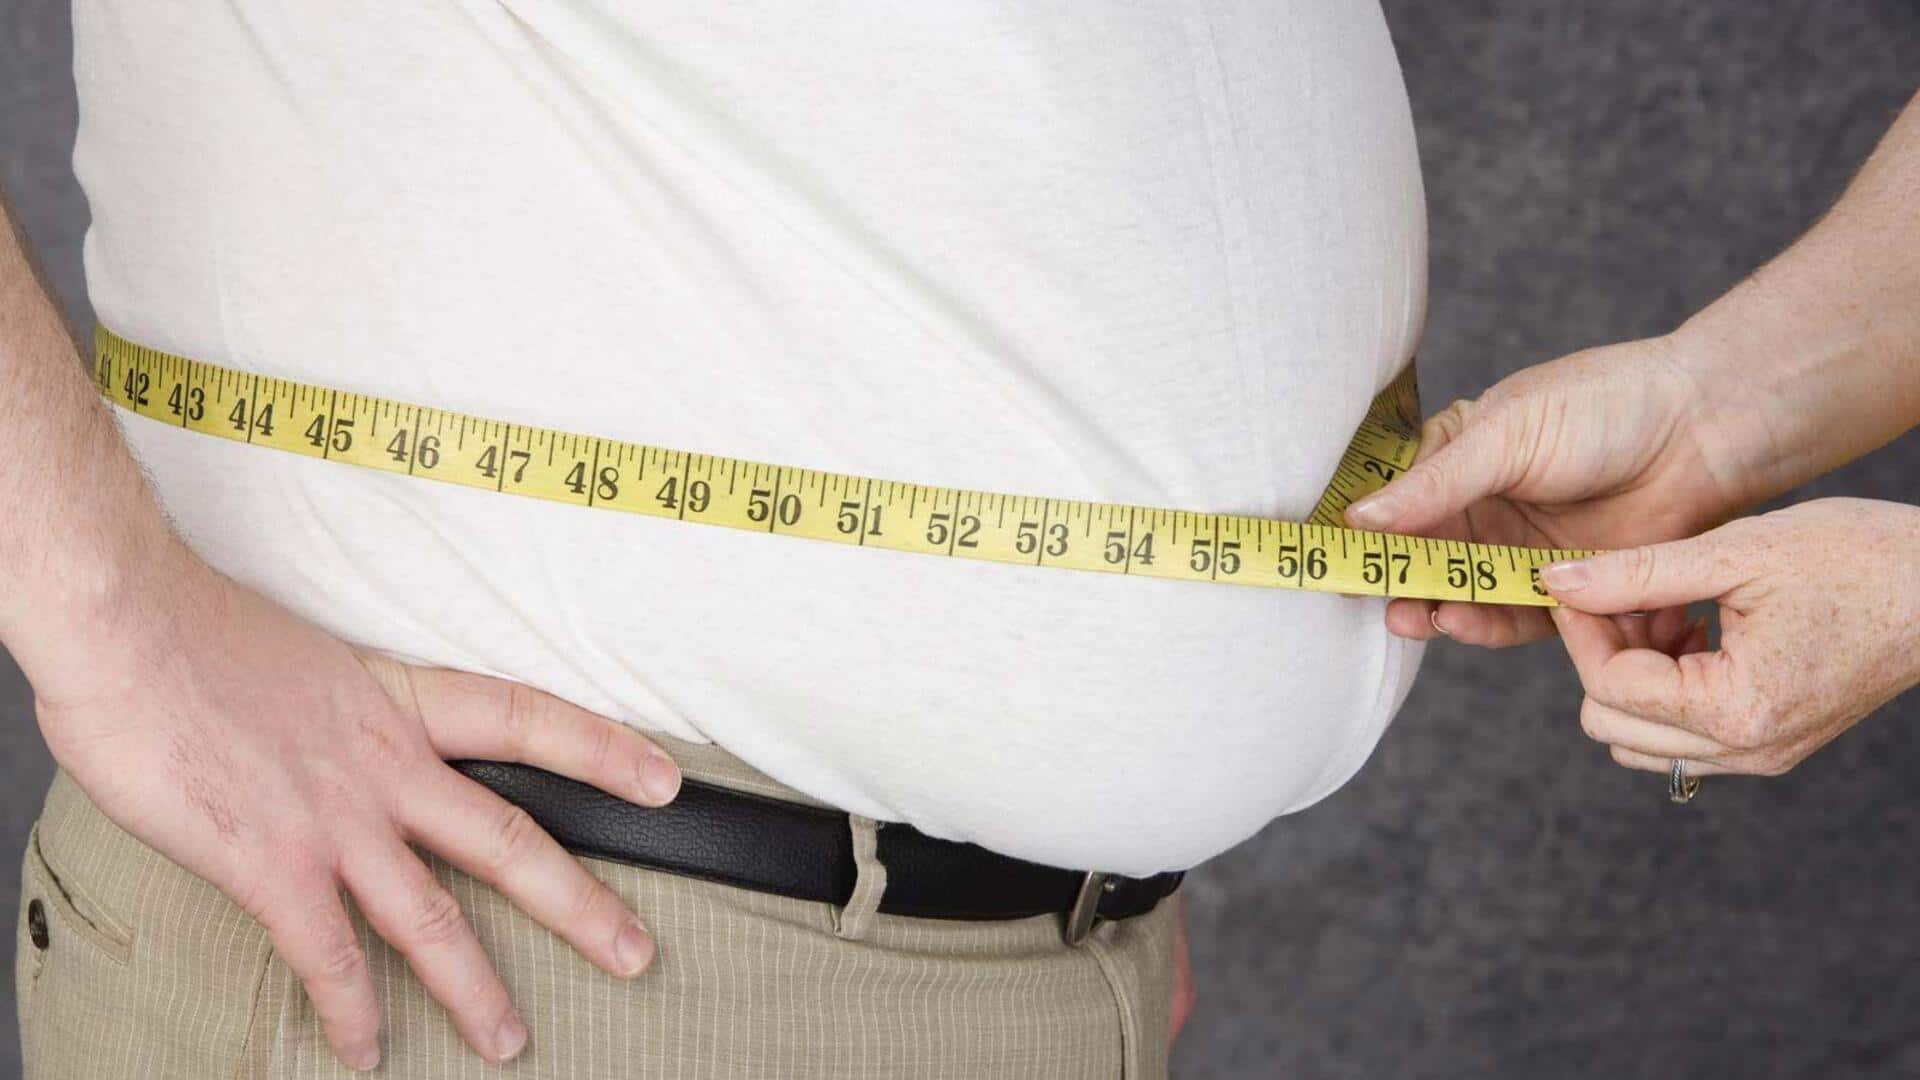 Genetic mutation identified as potential trigger for obesity, study finds